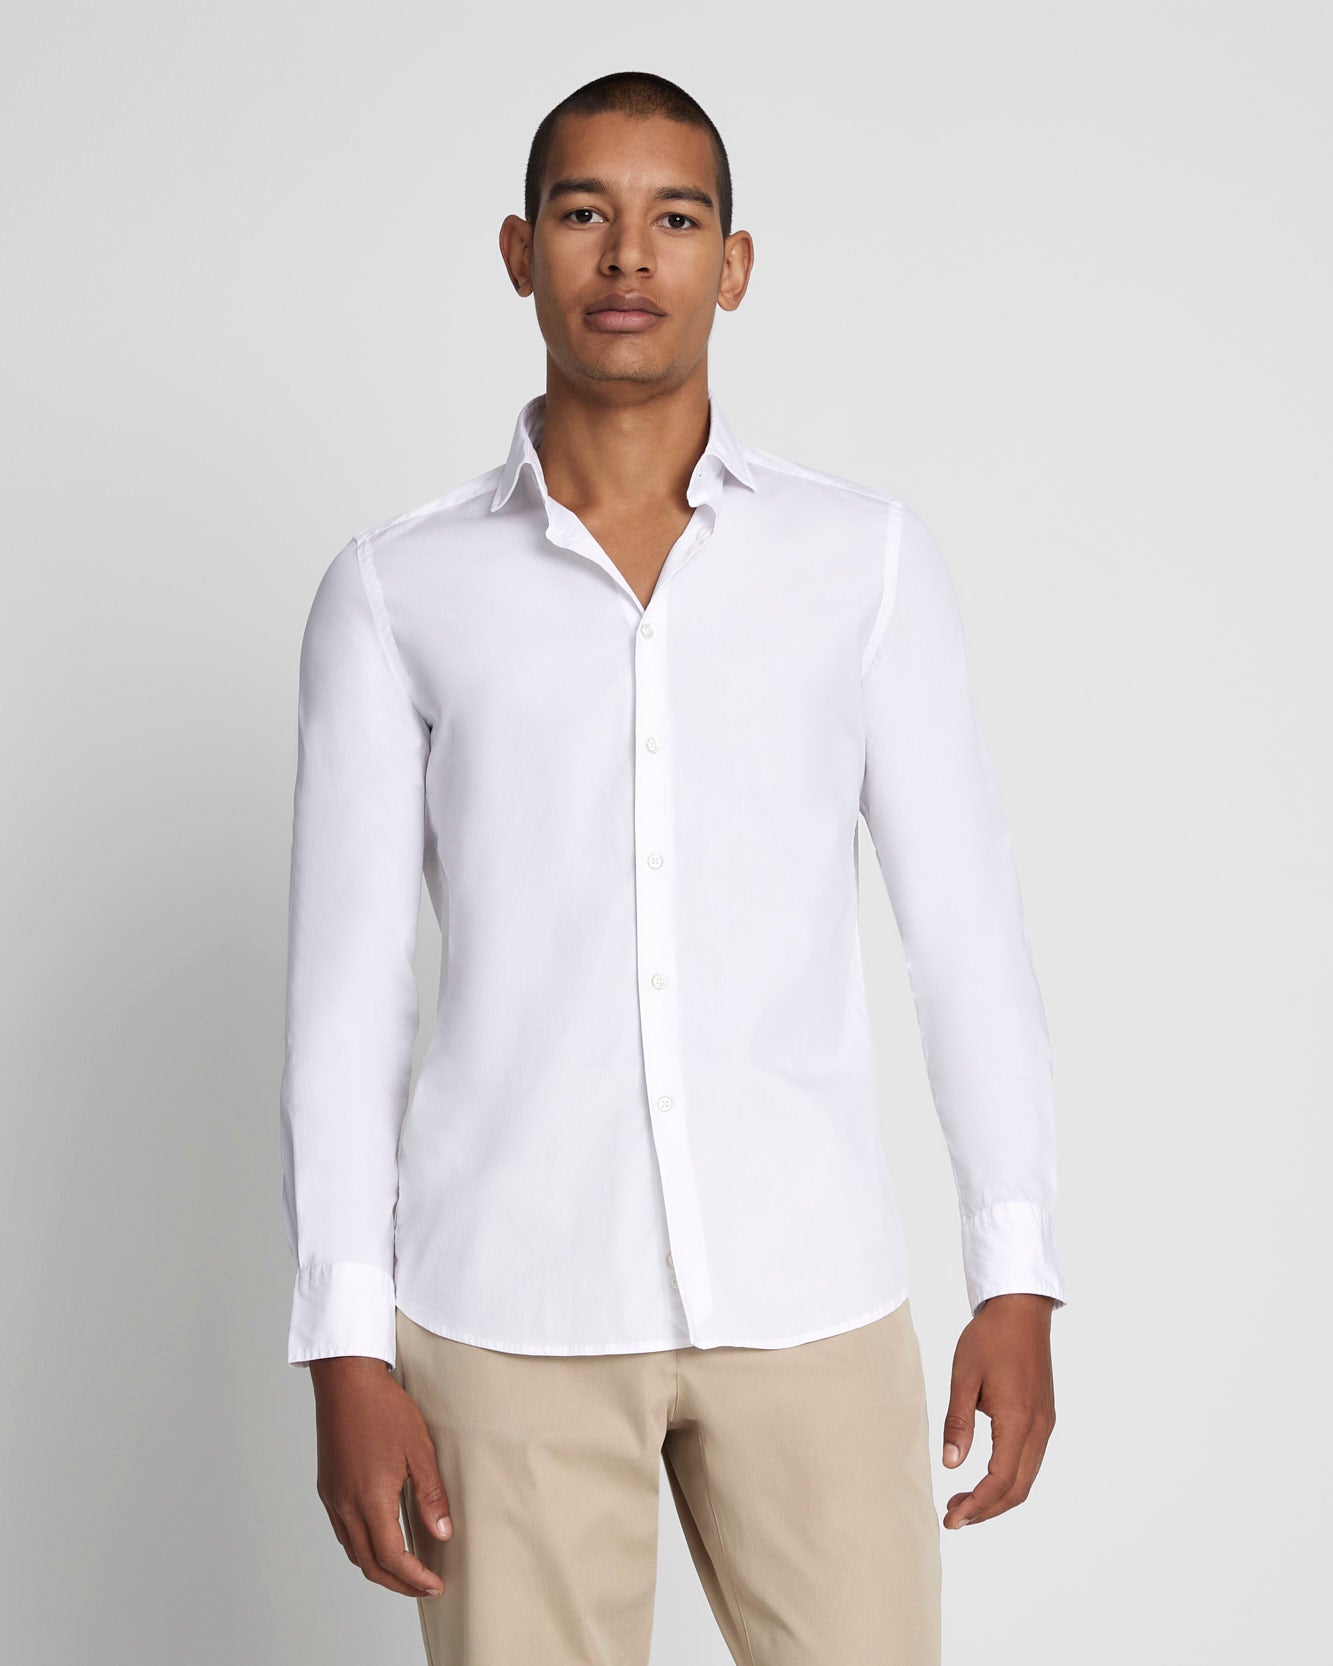 Long Sleeve Poplin Shirt in White | 7 For All Mankind